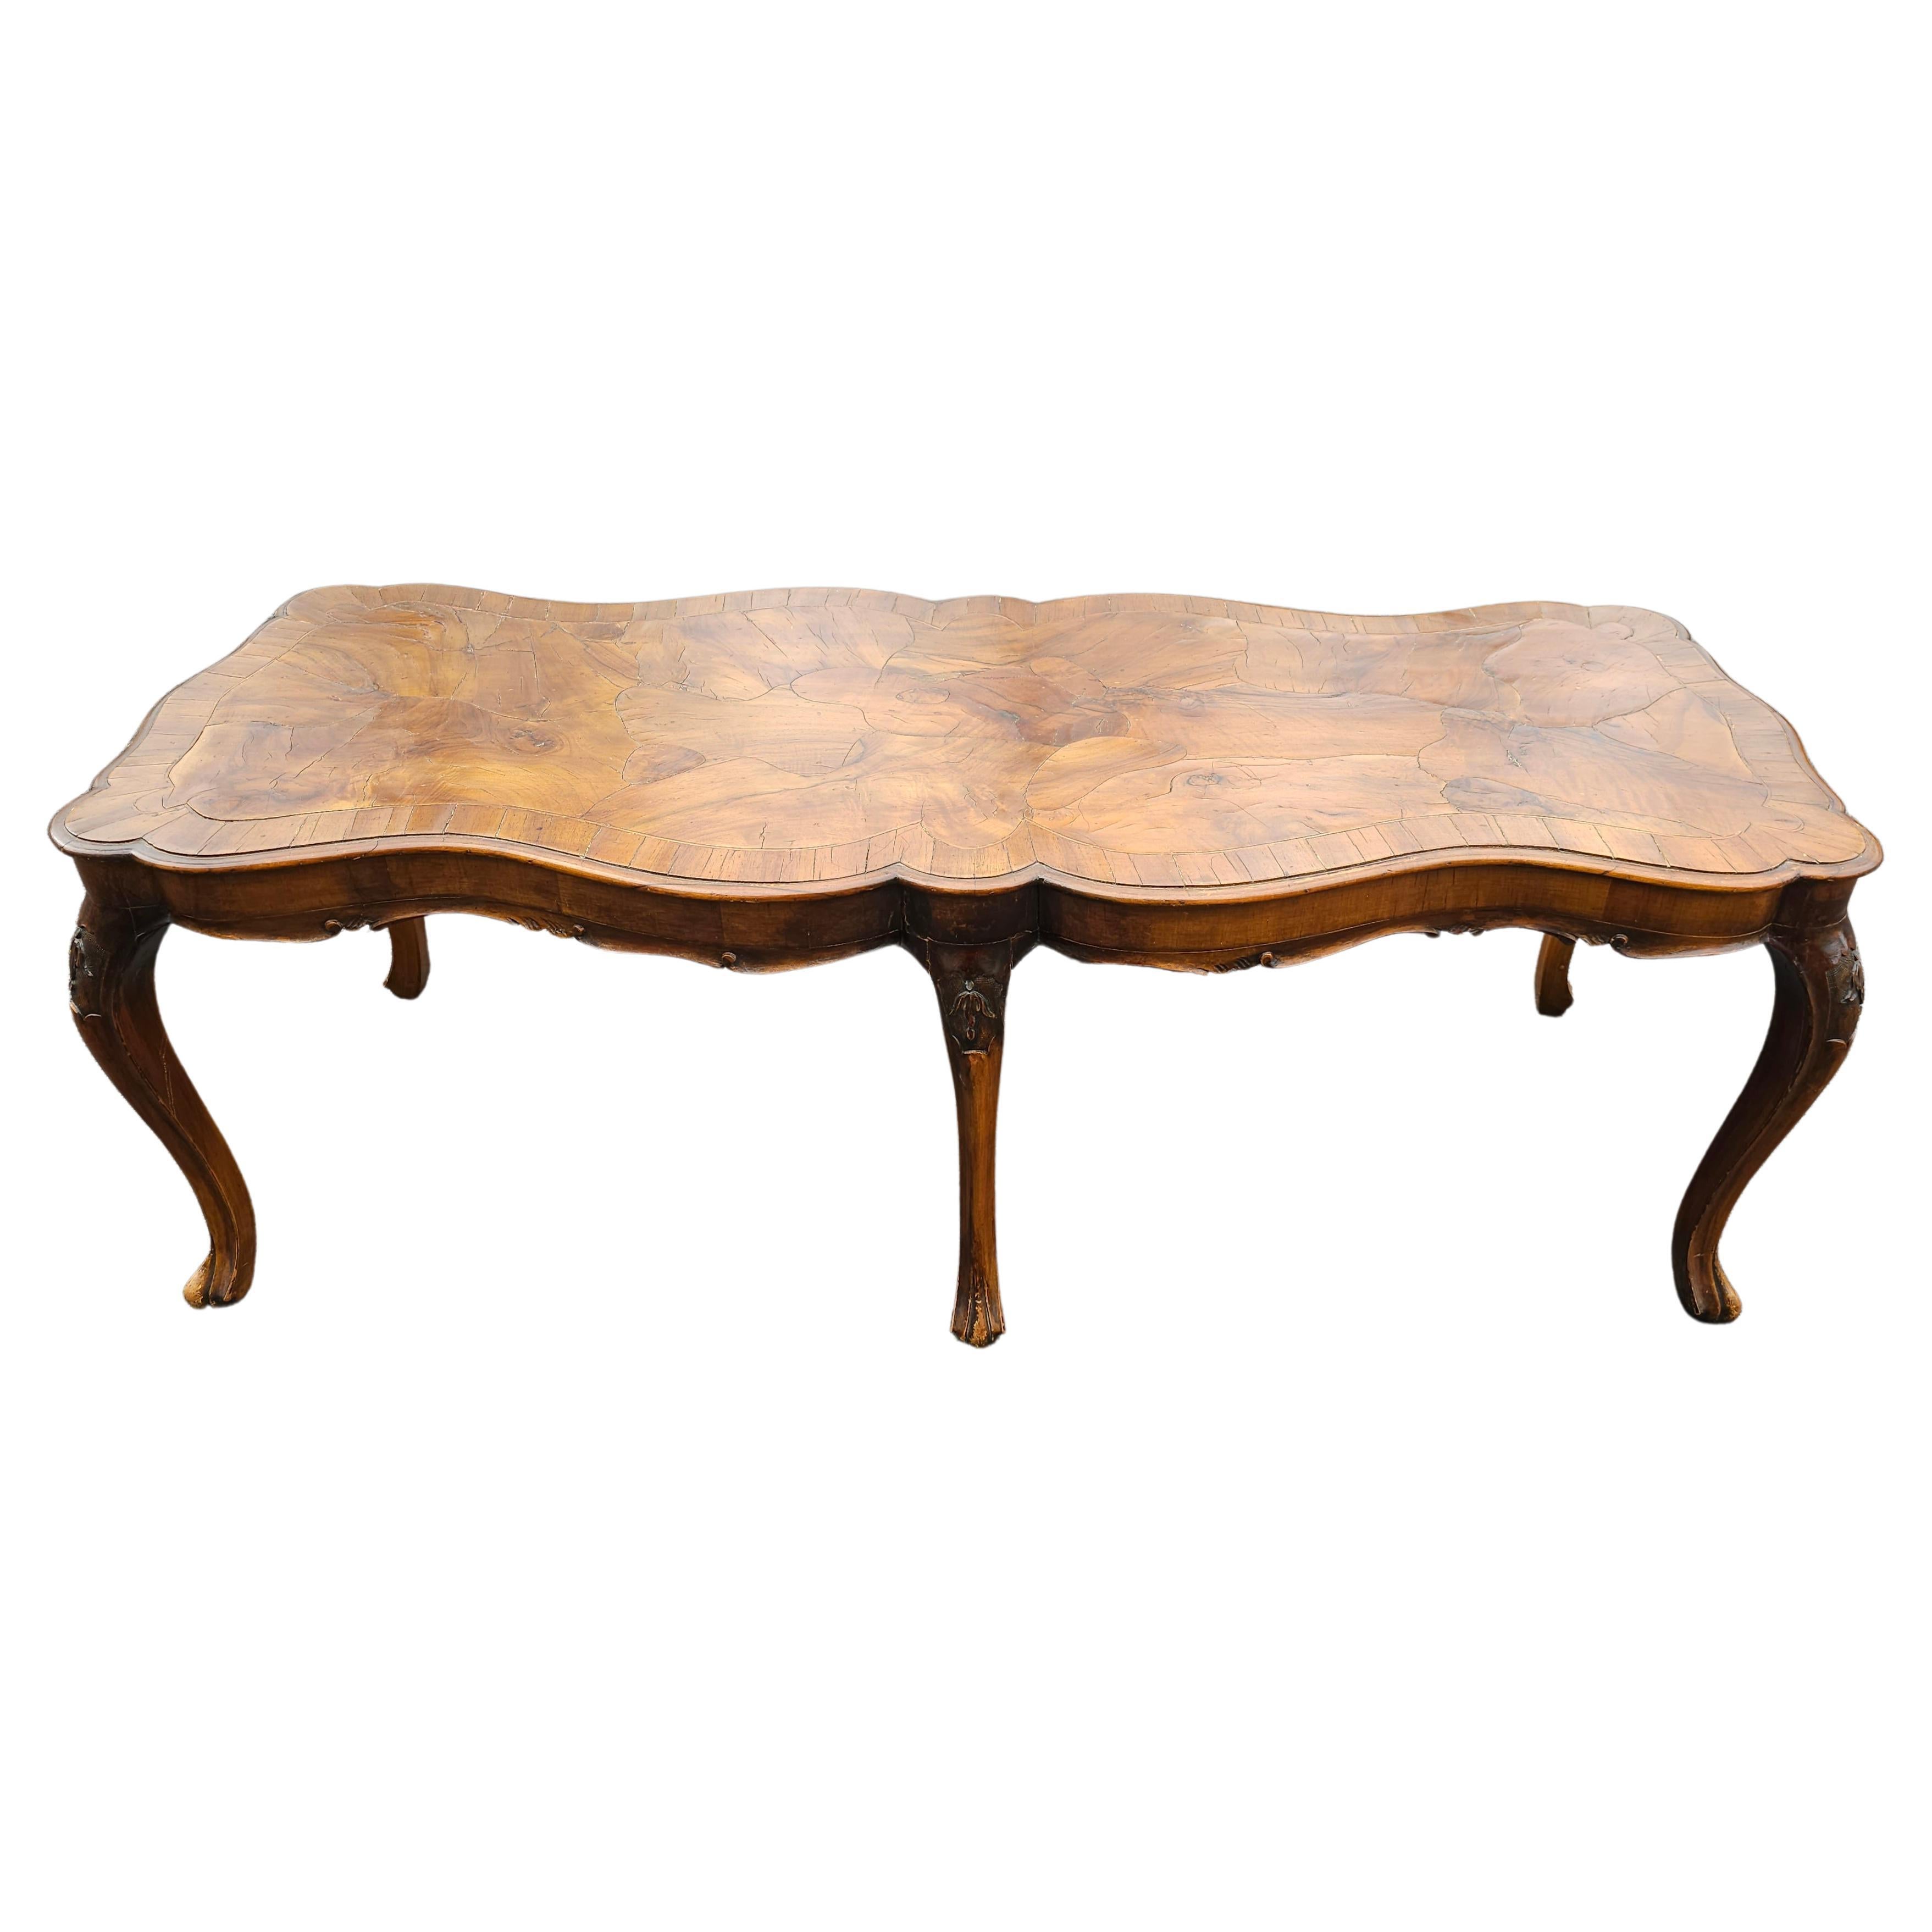 A rare Renaissance Revival Walnut Burl and Fruitwood Cocktail Table with generous size. 
Measures 55.5